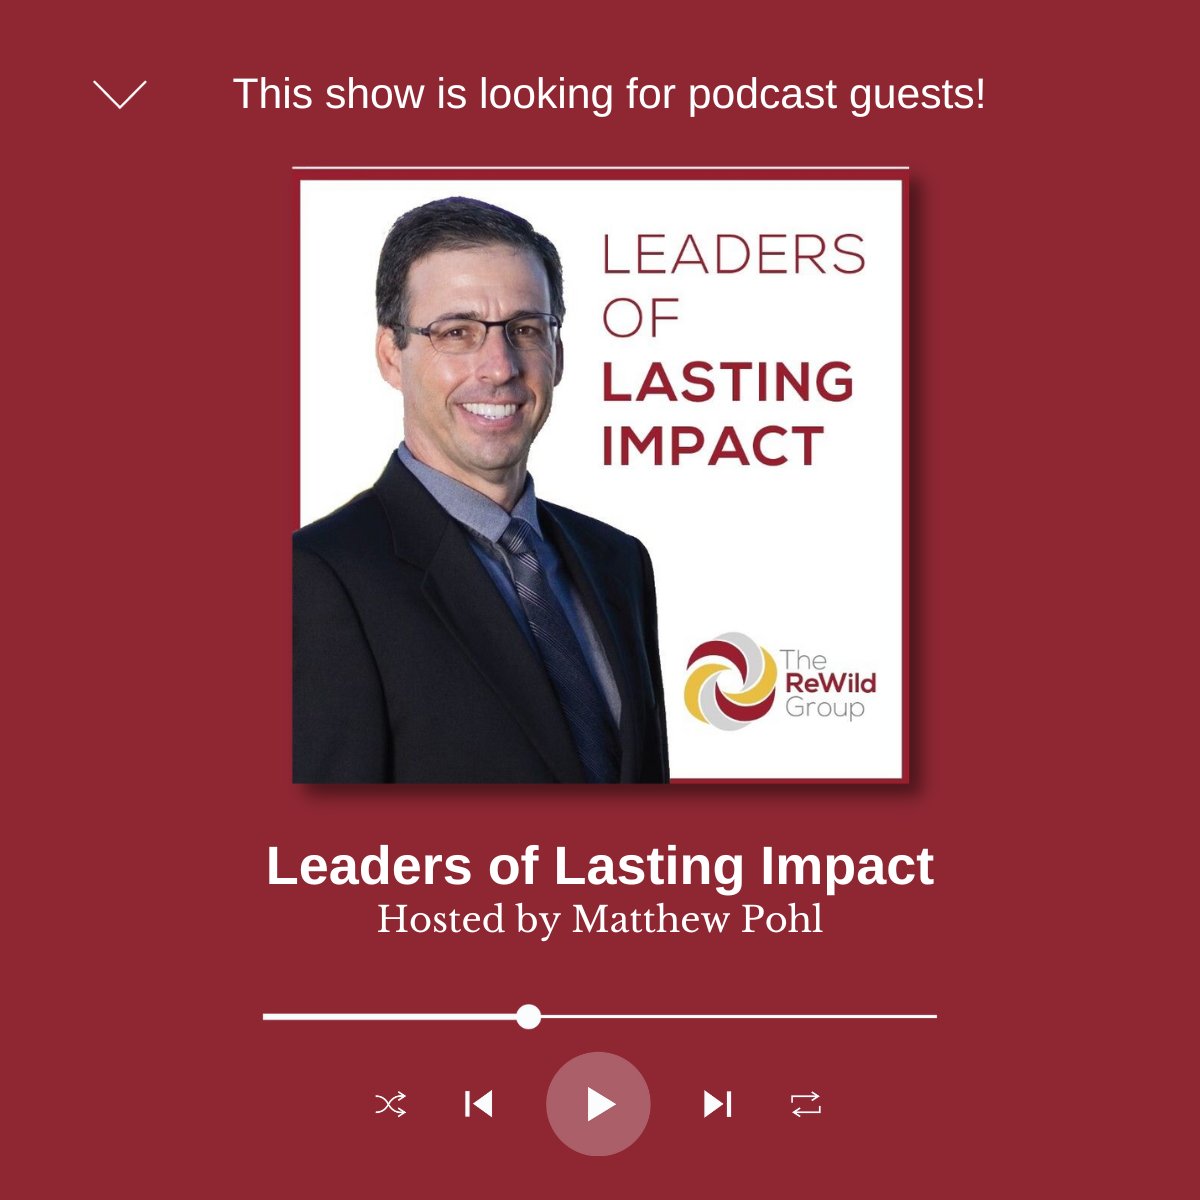 The Leaders of Lasting Impact Podcast hosted by Matthew Pohl is looking for remarkable guests who have a story to share about creating meaningful change and leaving a lasting mark on the world. Apply here: podcast.rewildgroup.com/podcast-guest #leaders #beaguest #findaguest #journorequest